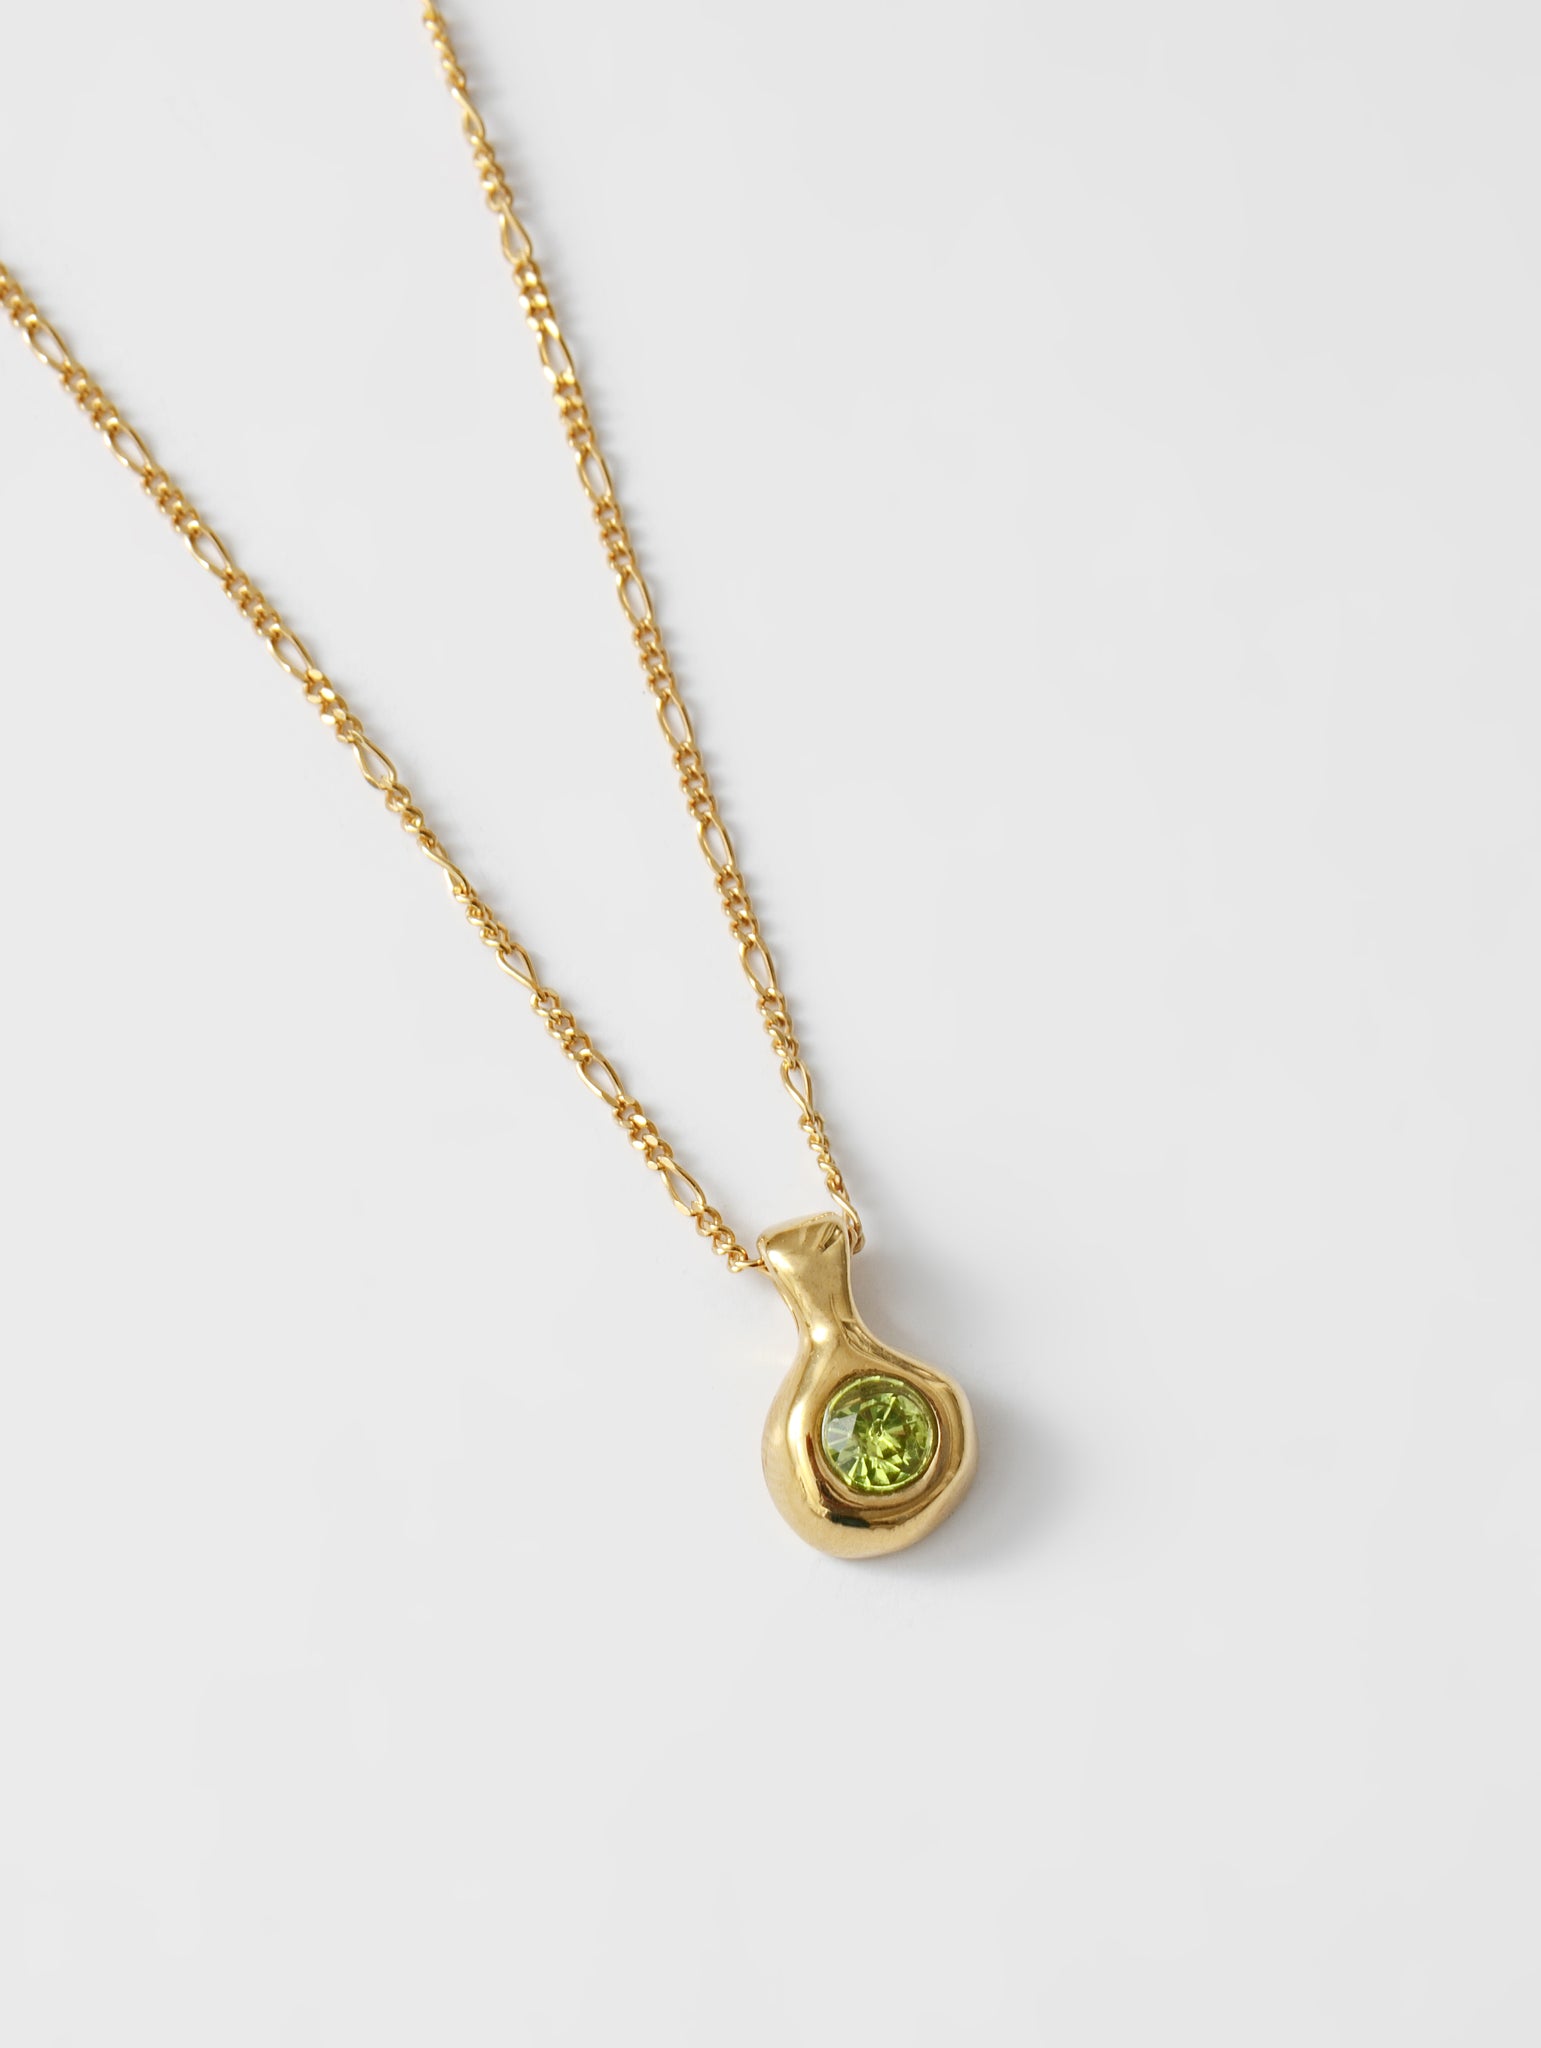 Liv Necklace in Green and Gold